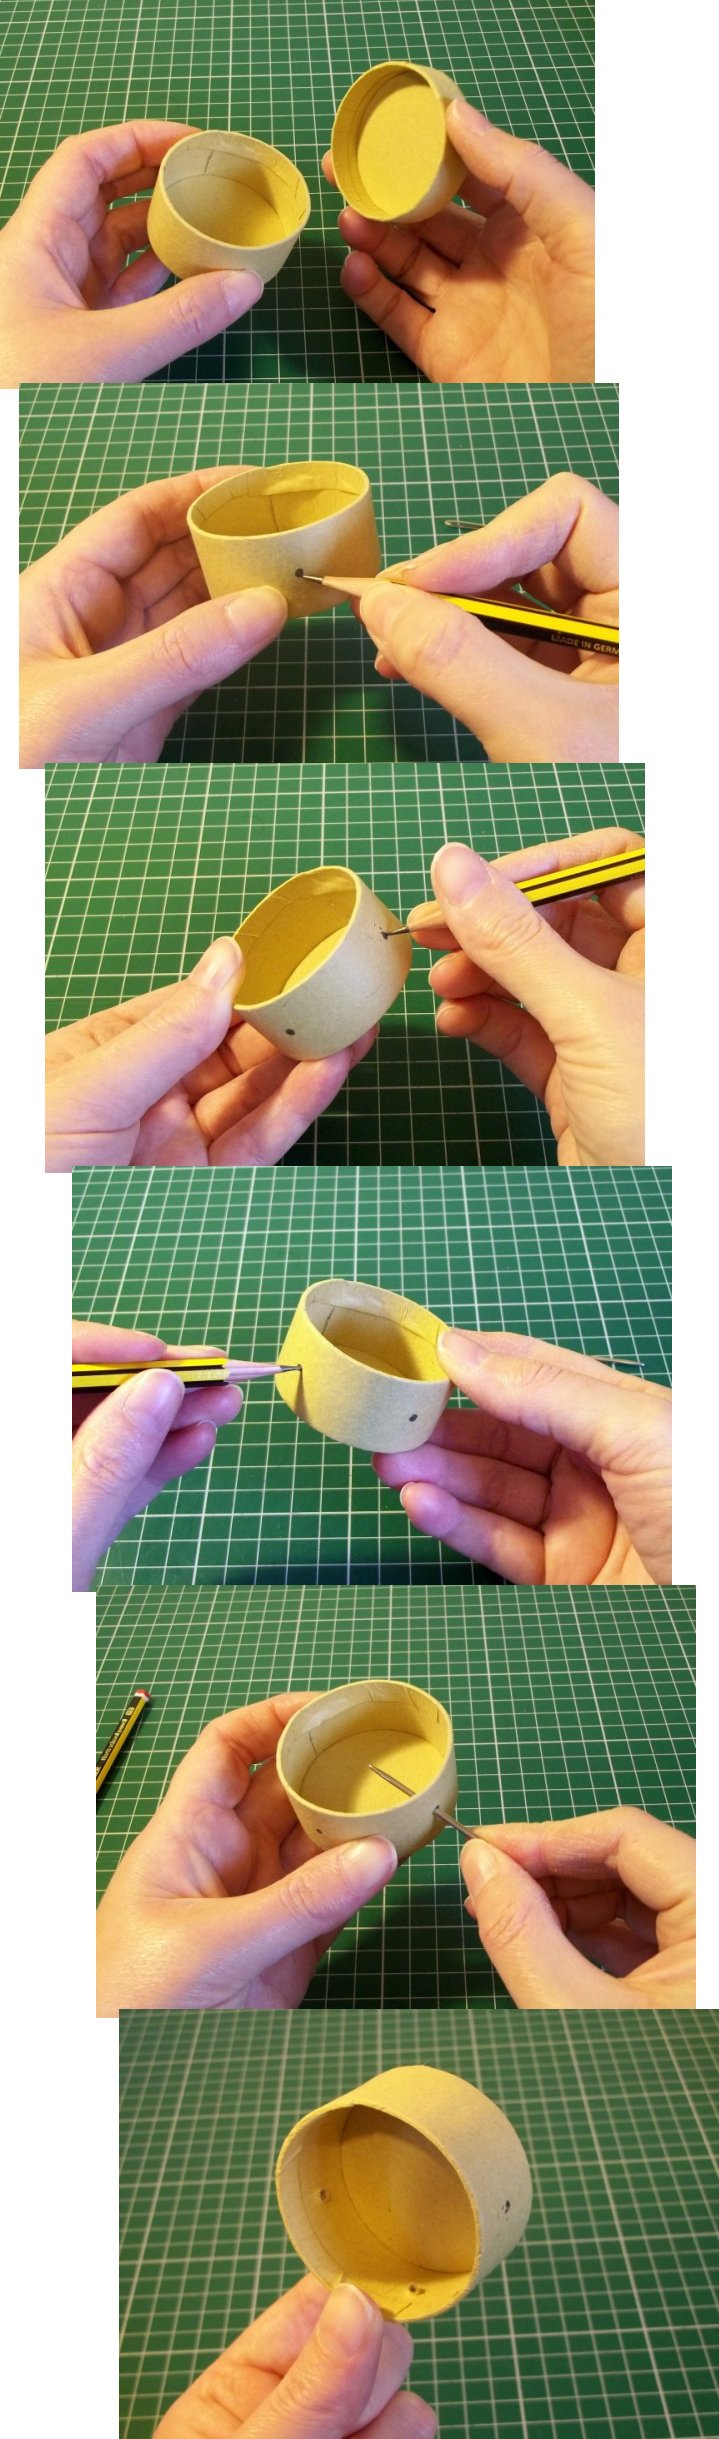 Things to make and do - Hand Drum 